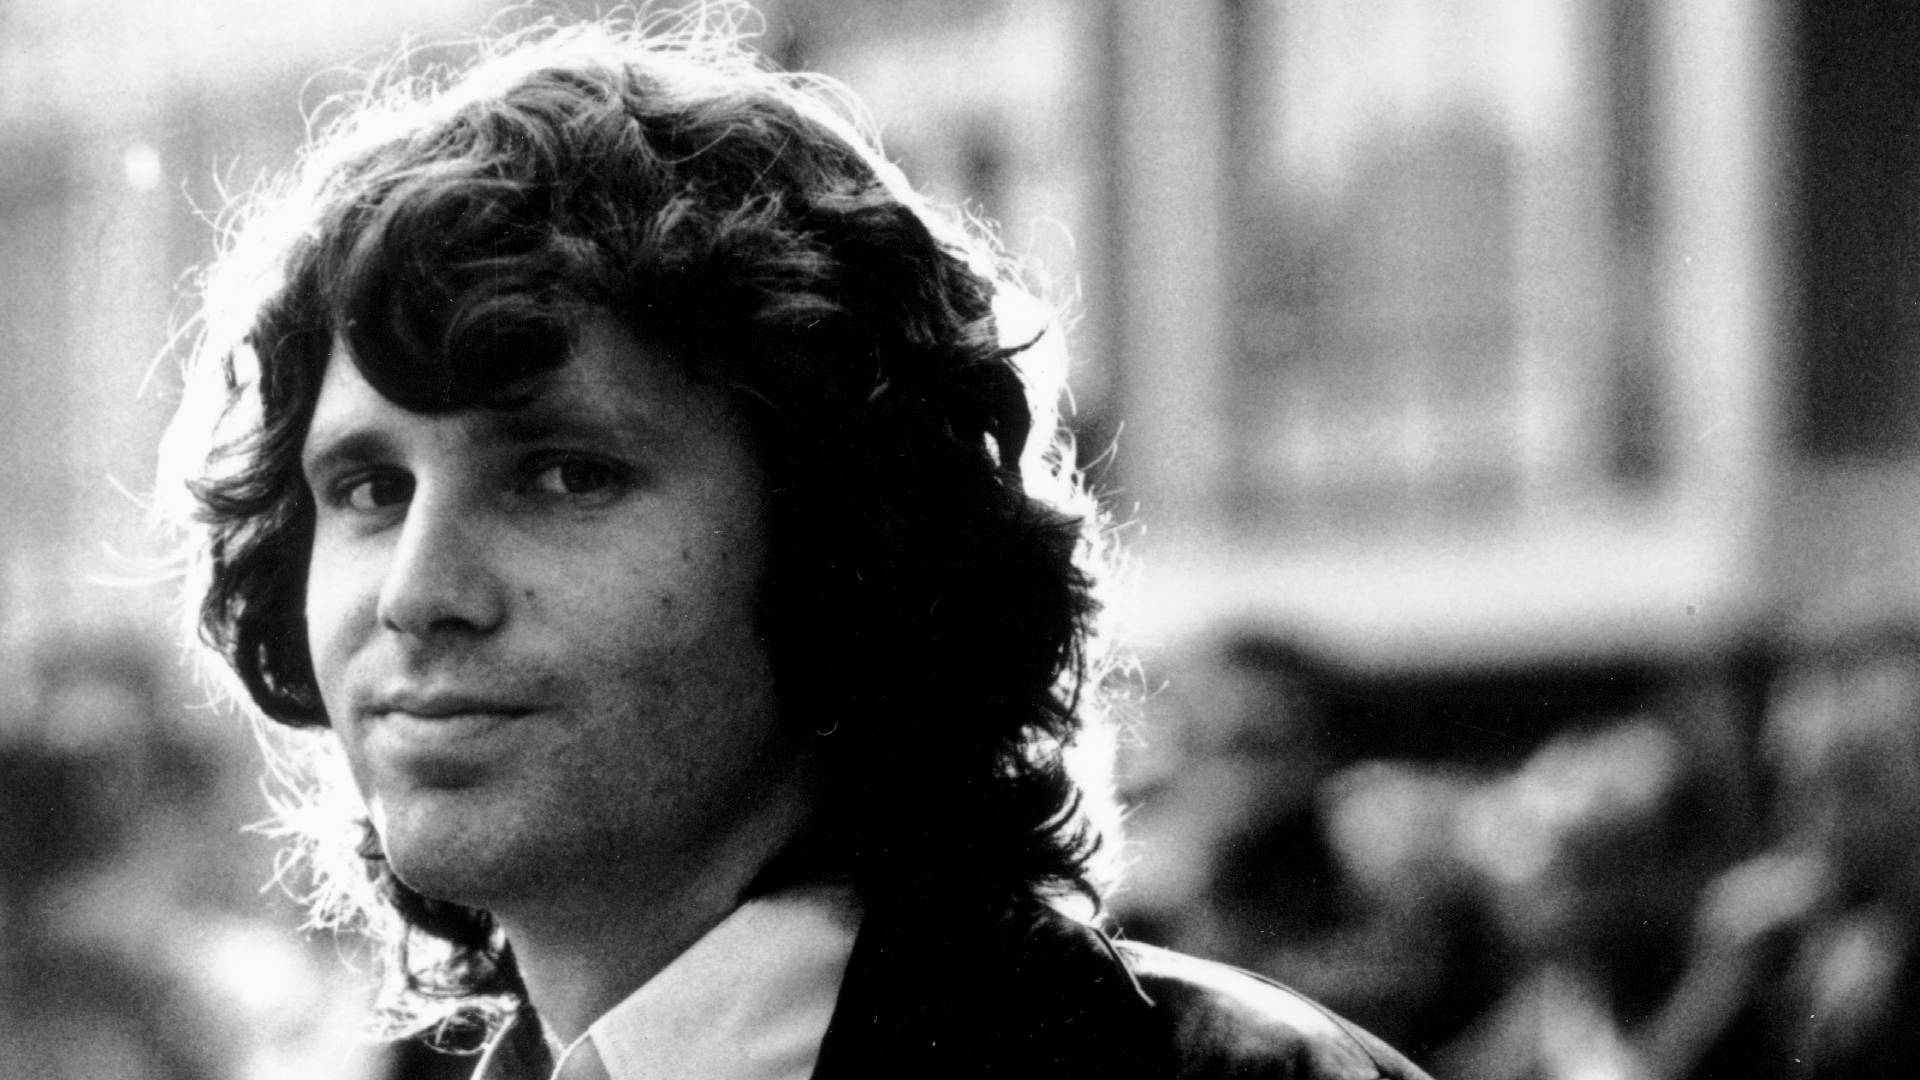 Legendary Jim Morrison With A Charming Smile Background